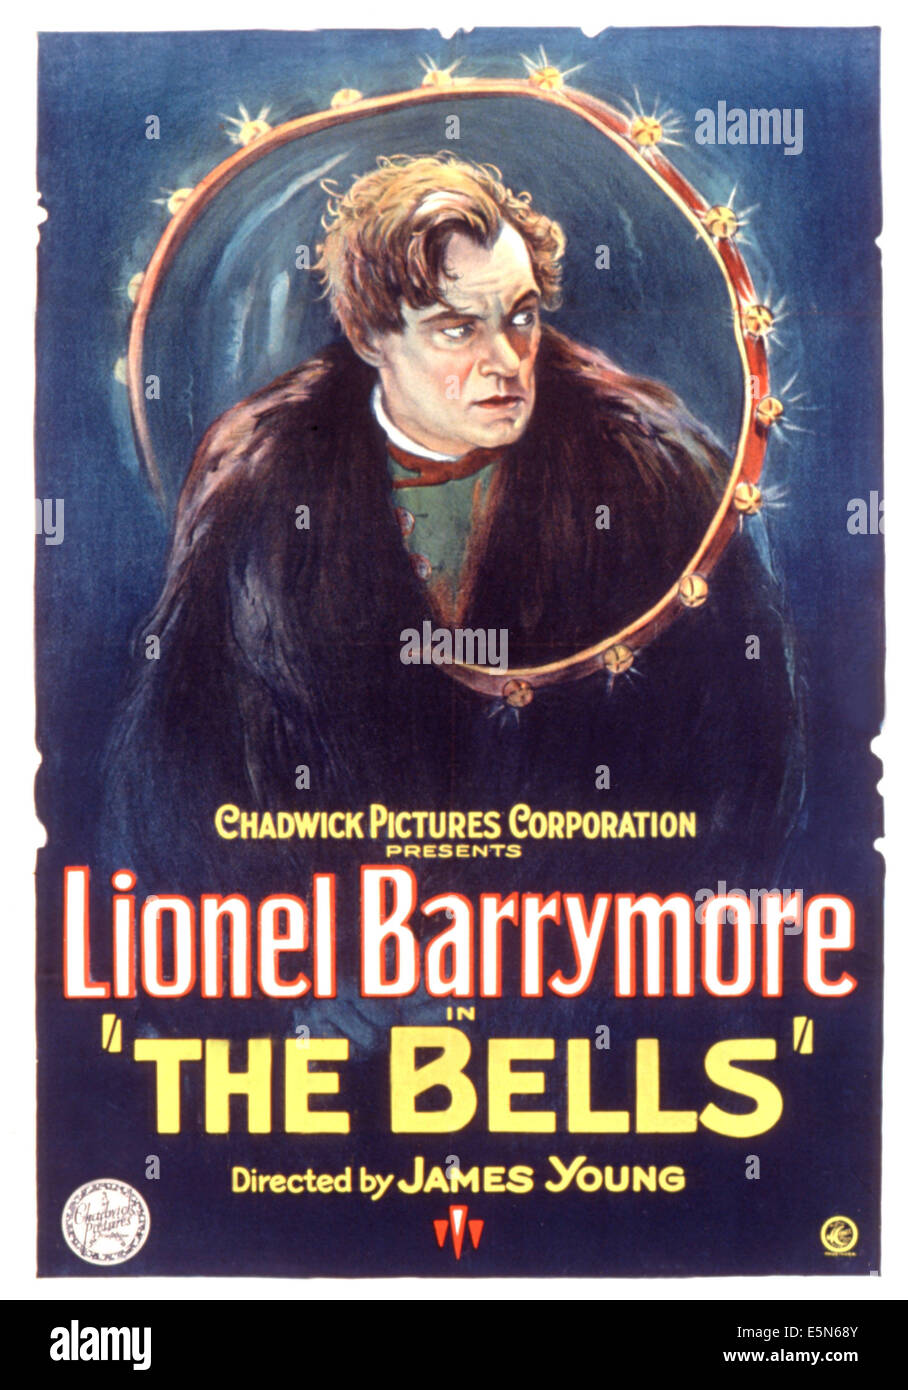 THE BELLS, Lionel Barrymore, 1926 Stock Photo